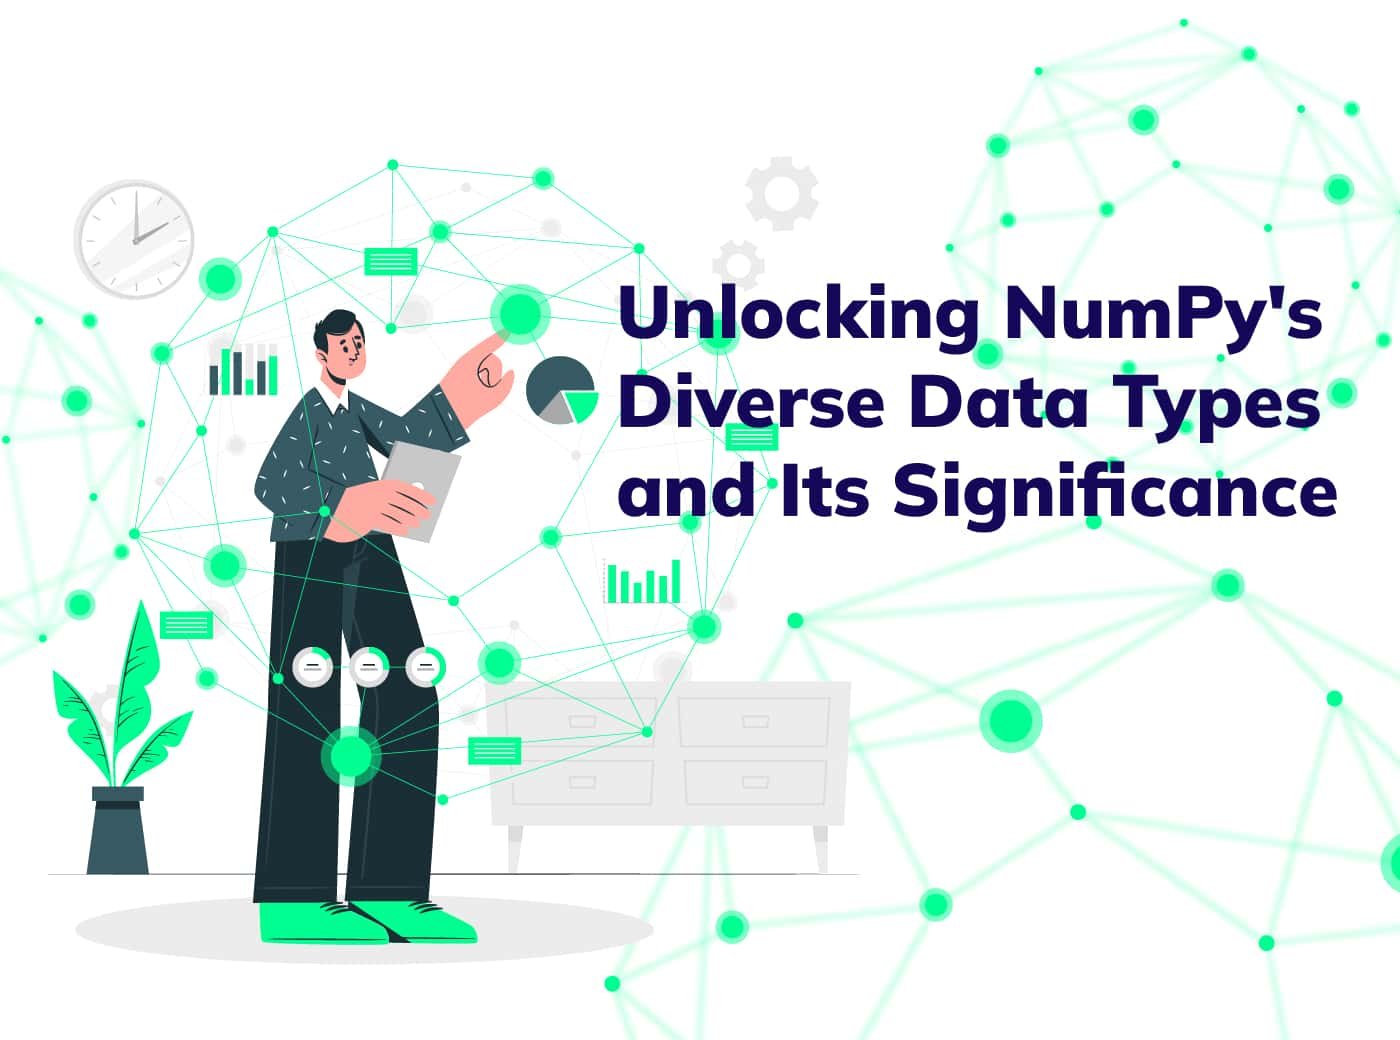 Unlocking NumPy’s Diverse Data Types and Its Significance